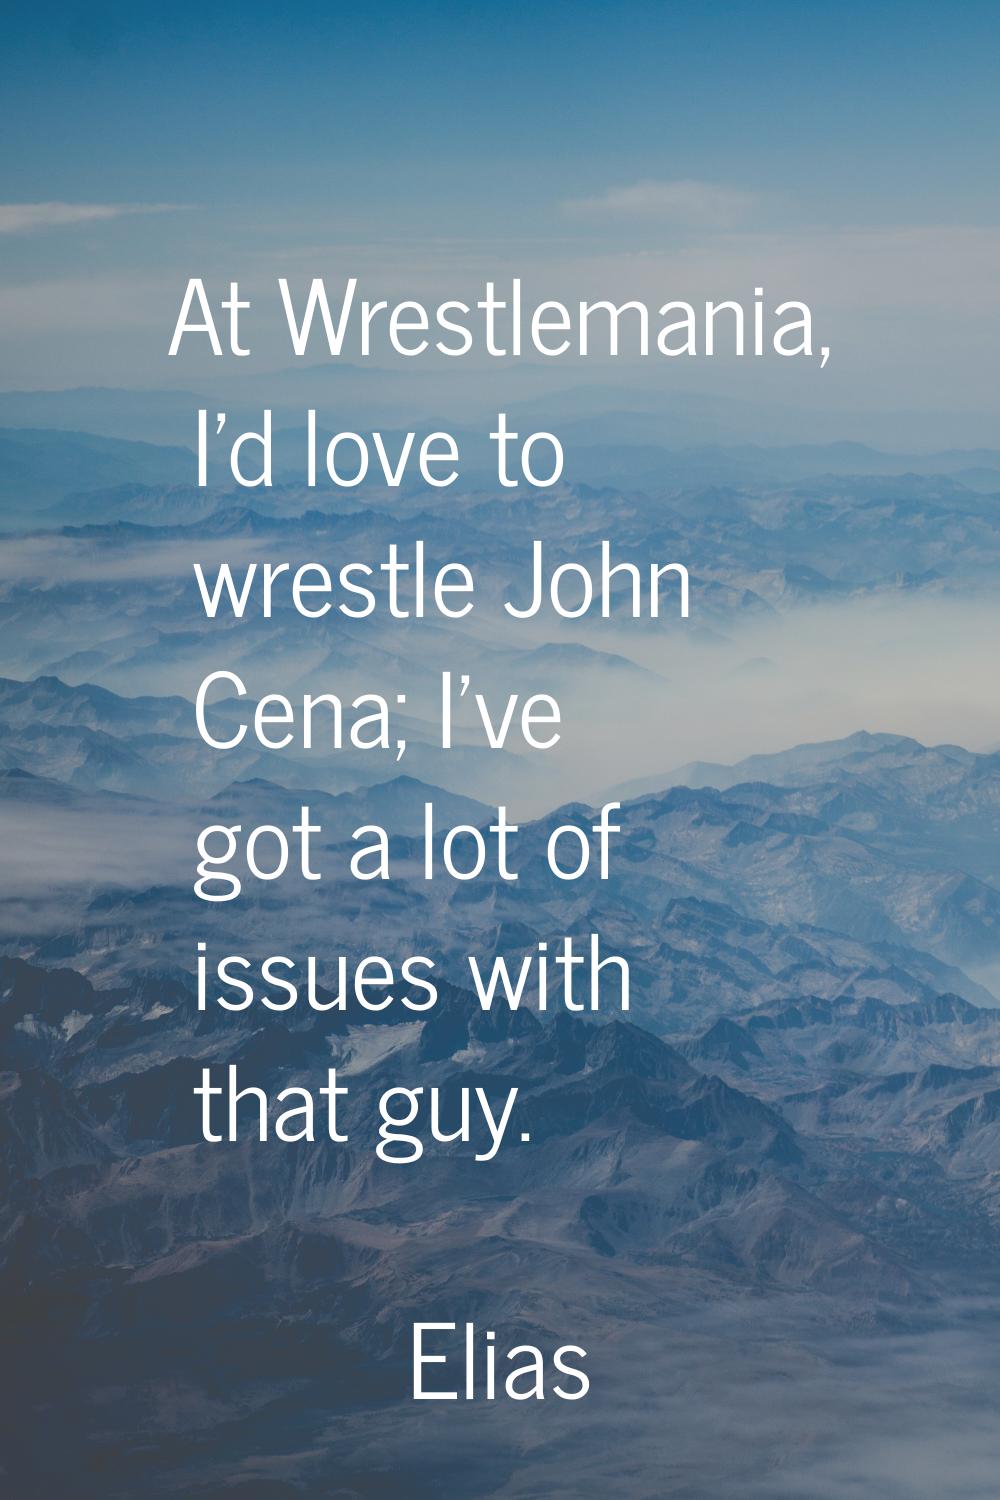 At Wrestlemania, I'd love to wrestle John Cena; I've got a lot of issues with that guy.